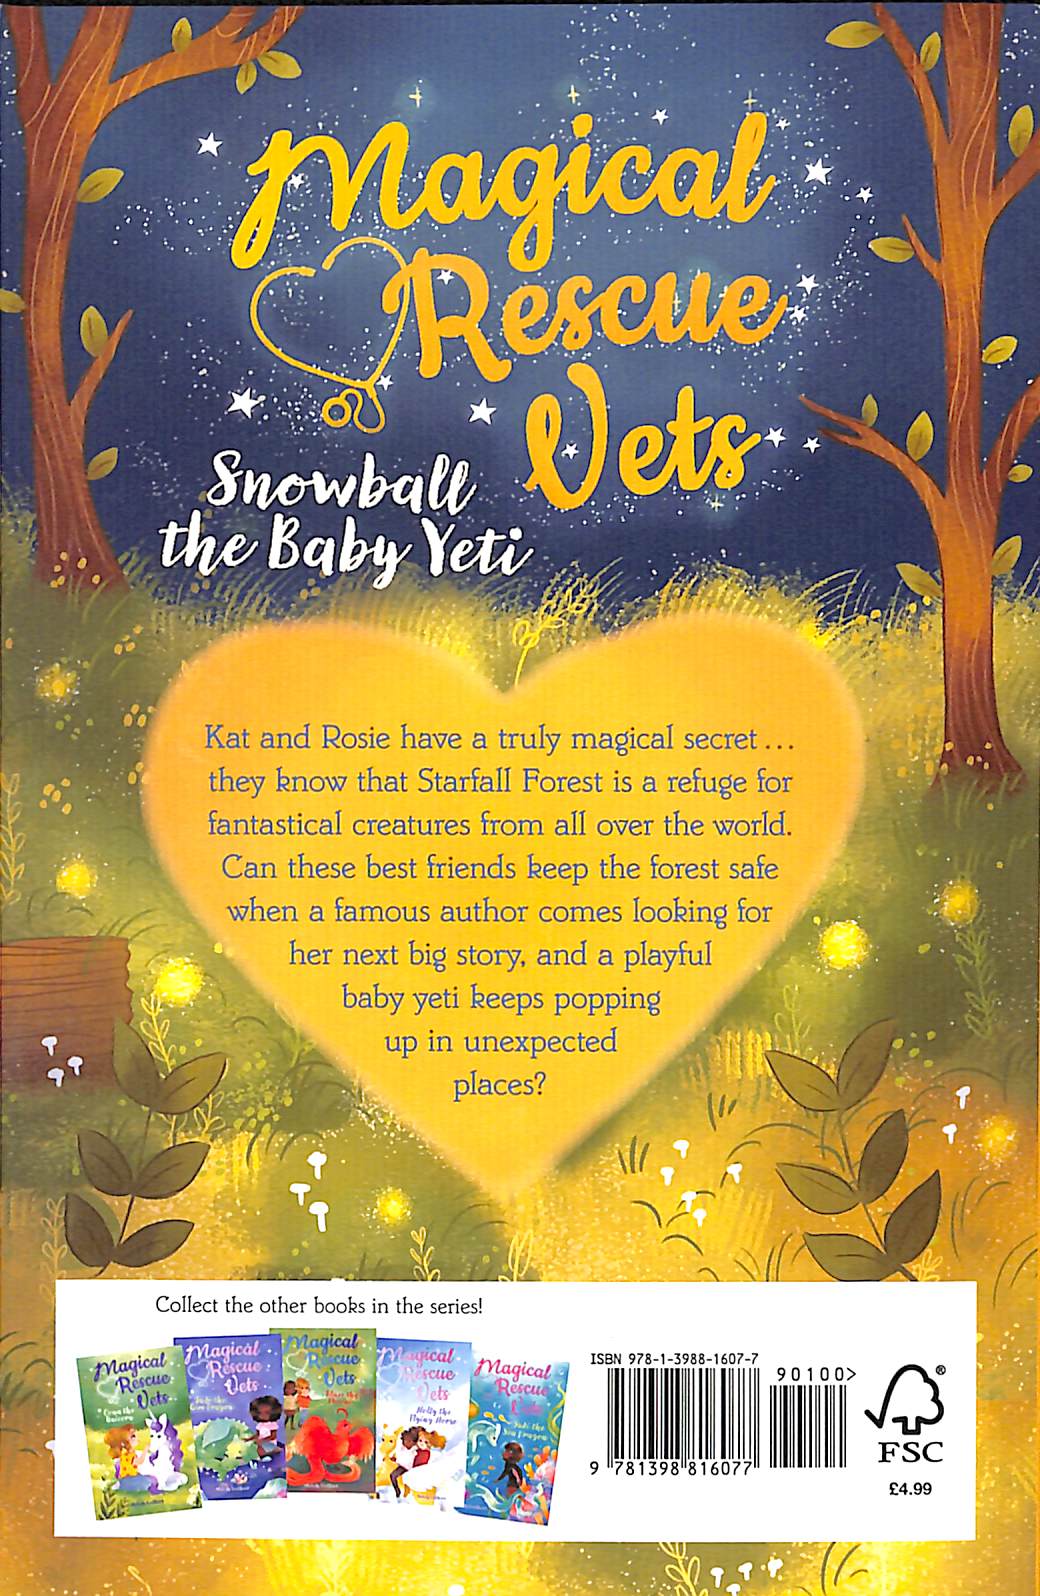 Magical Rescue Vets: Snowball the Baby Yeti [Book]